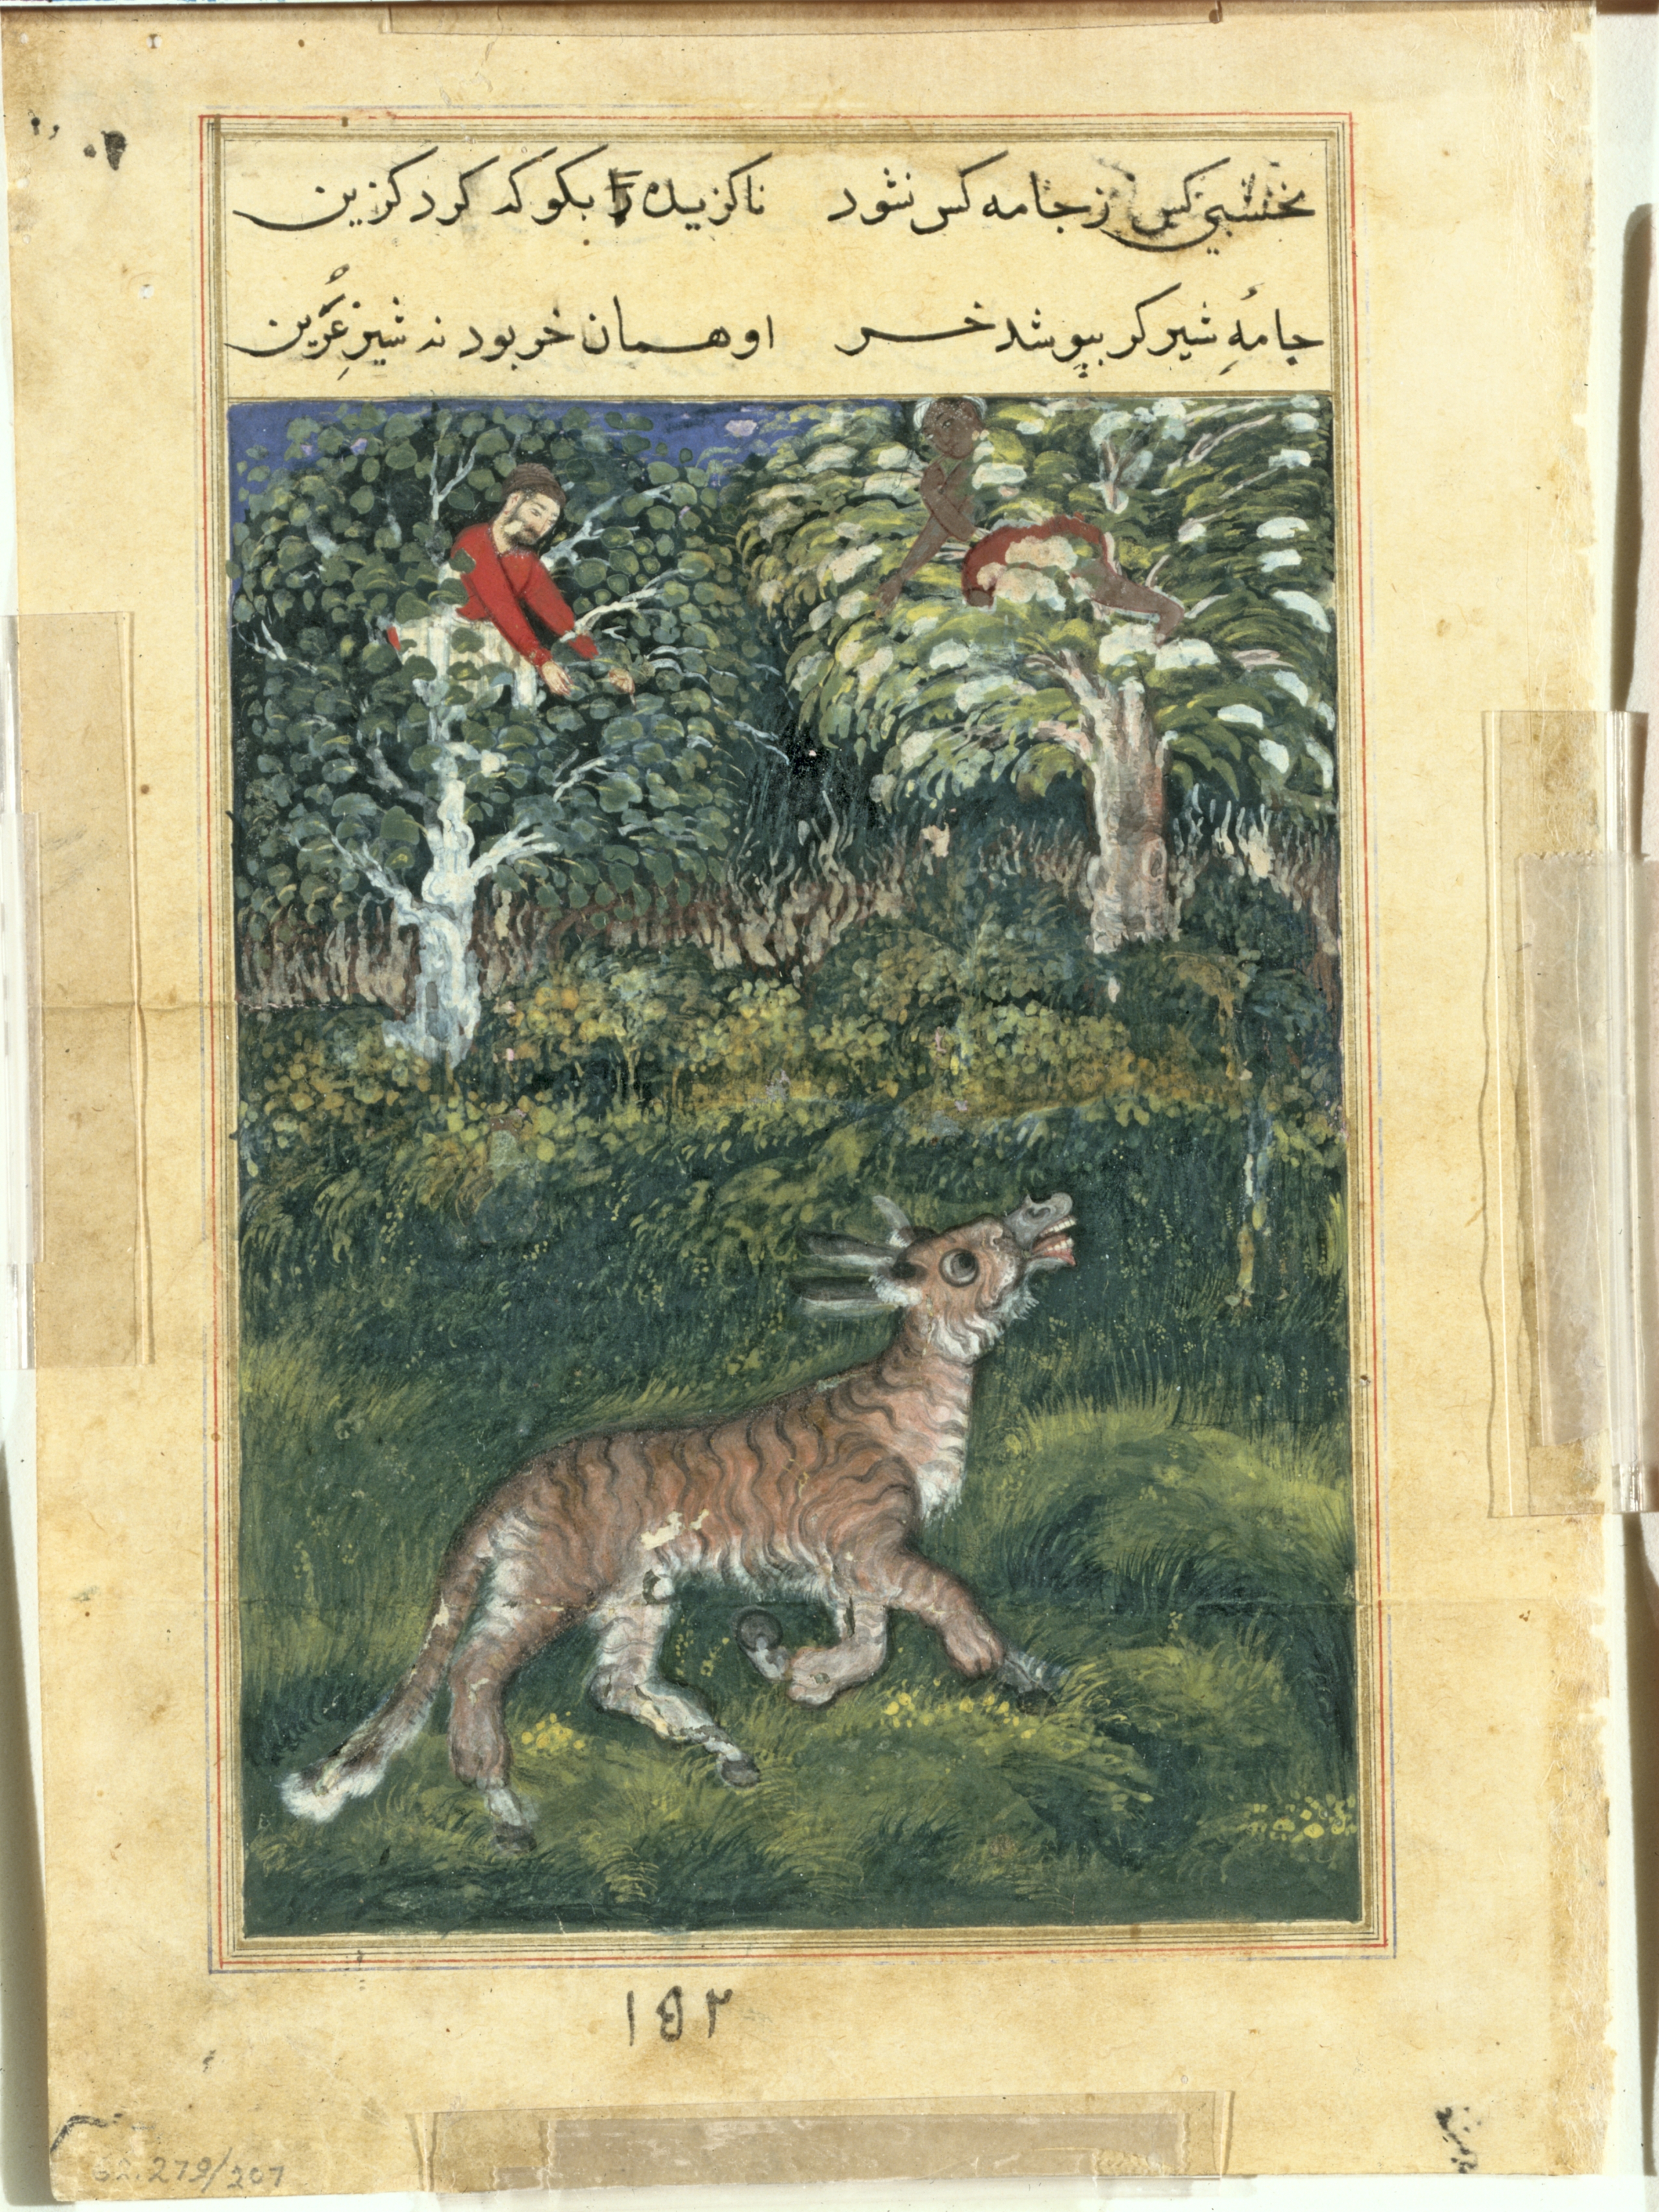 The donkey, in a tiger’s skin, reveals his identity by braying aloud, from a Tuti-nama (Tales of a Parrot): Thirty-first Night